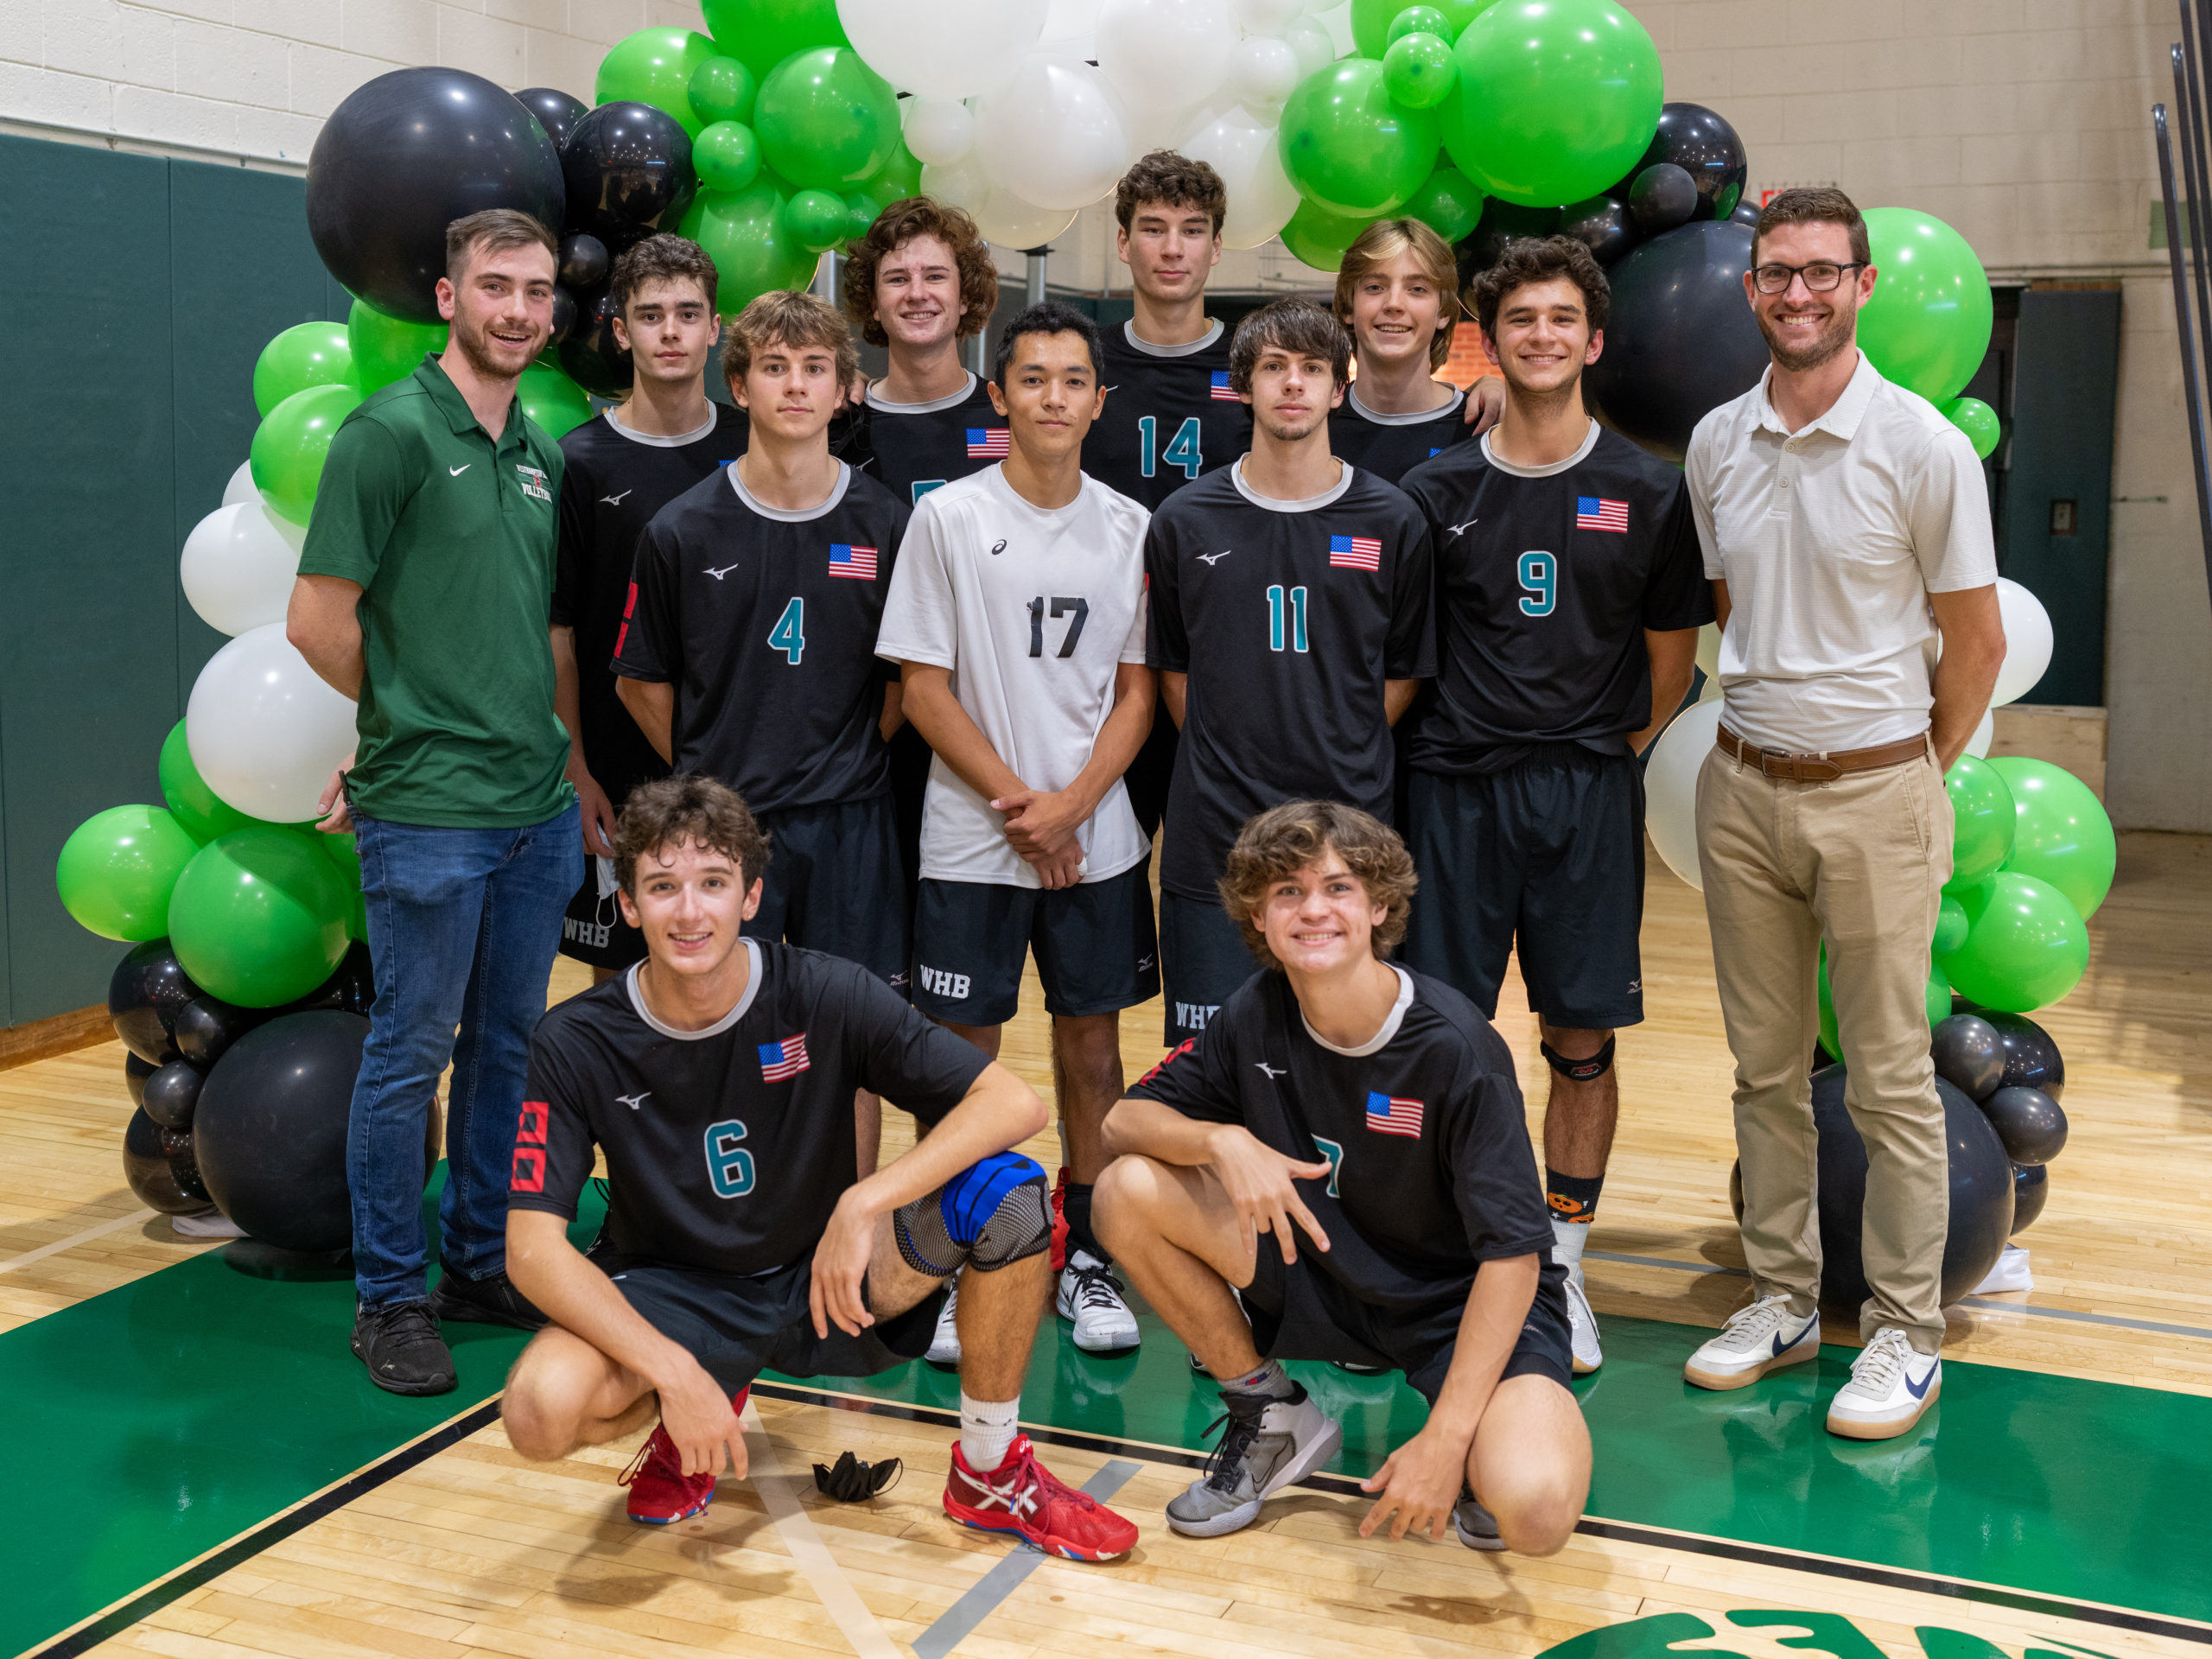 The Westhampton Beach boys volleyball team enjoyed its Senior Night with a 3-0 victory over Sachem North on Thursday, October 21.